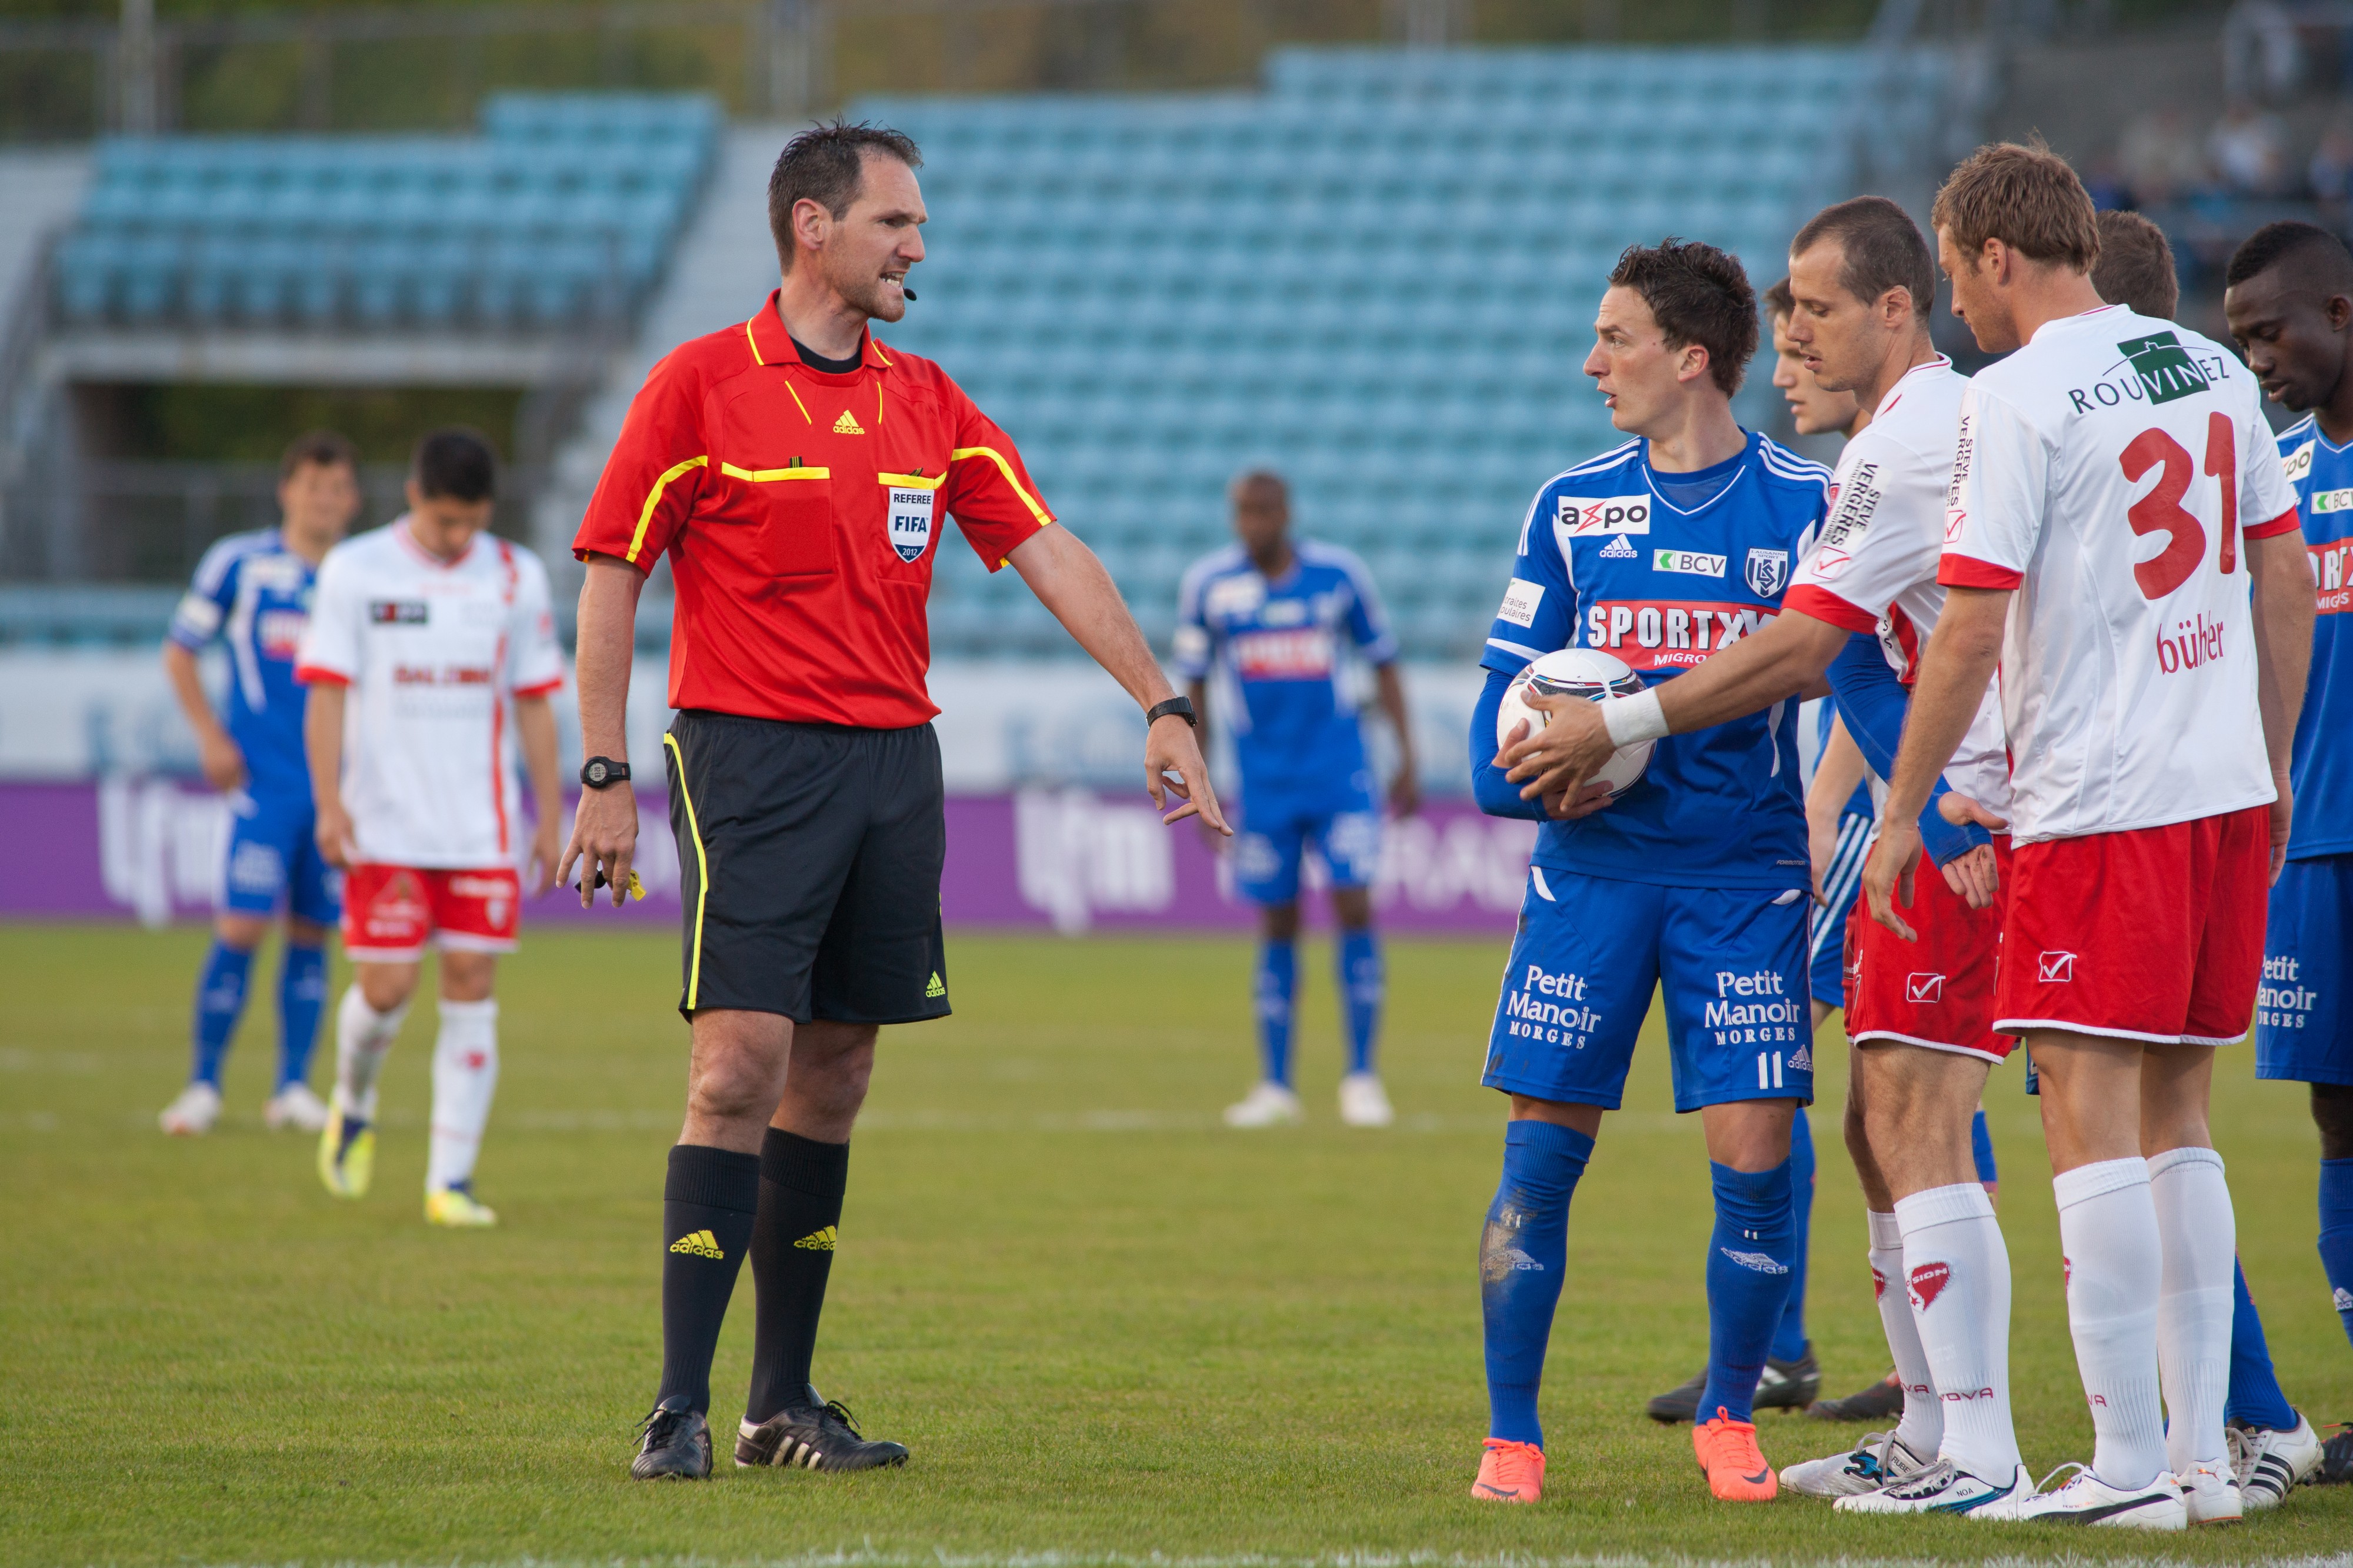 Referee - Lausanne vs Sion 02 may 2012